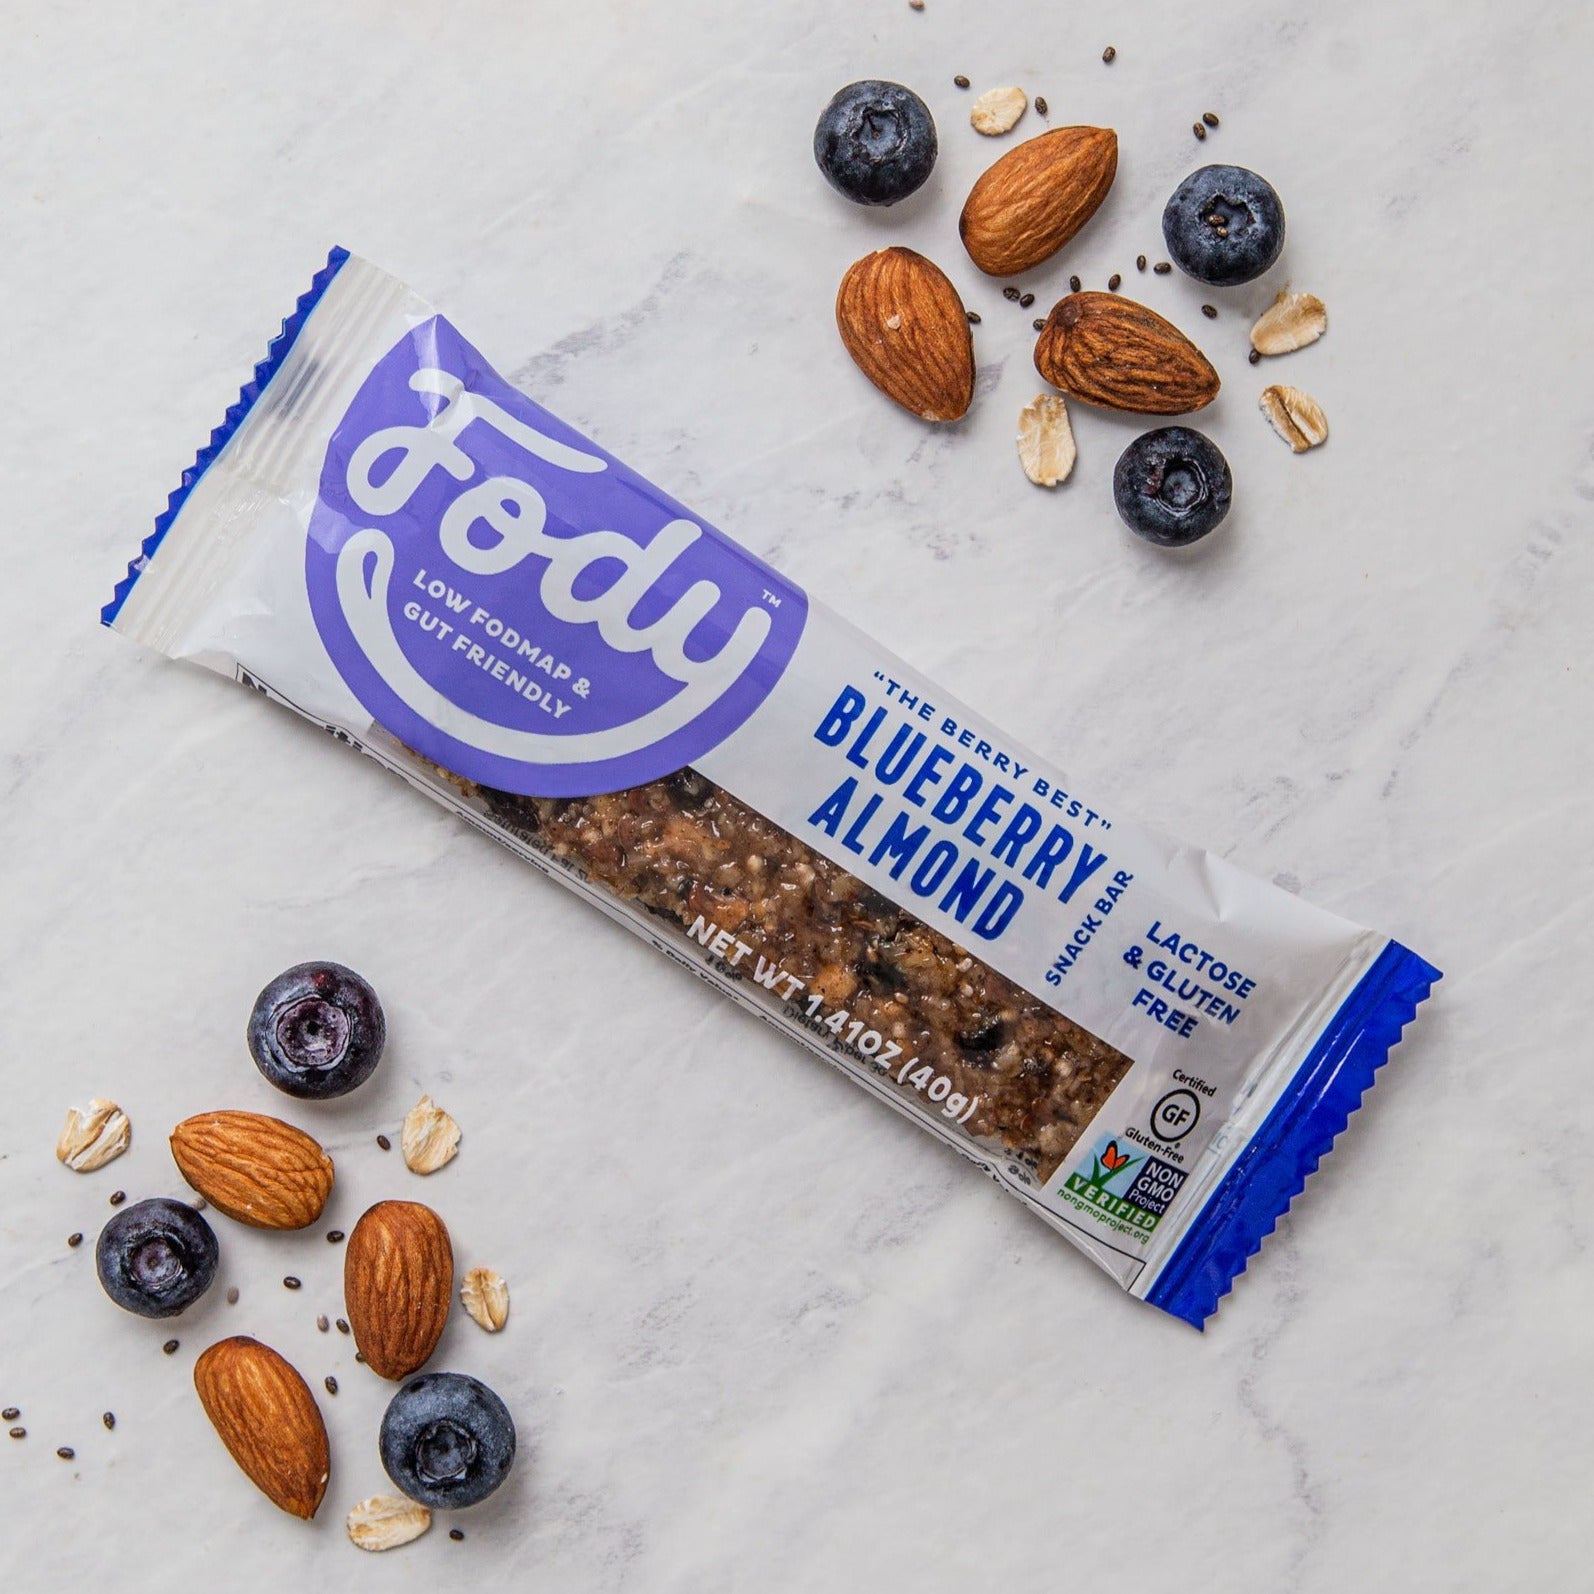 Blueberry Almond Snack Bars - Box of 12